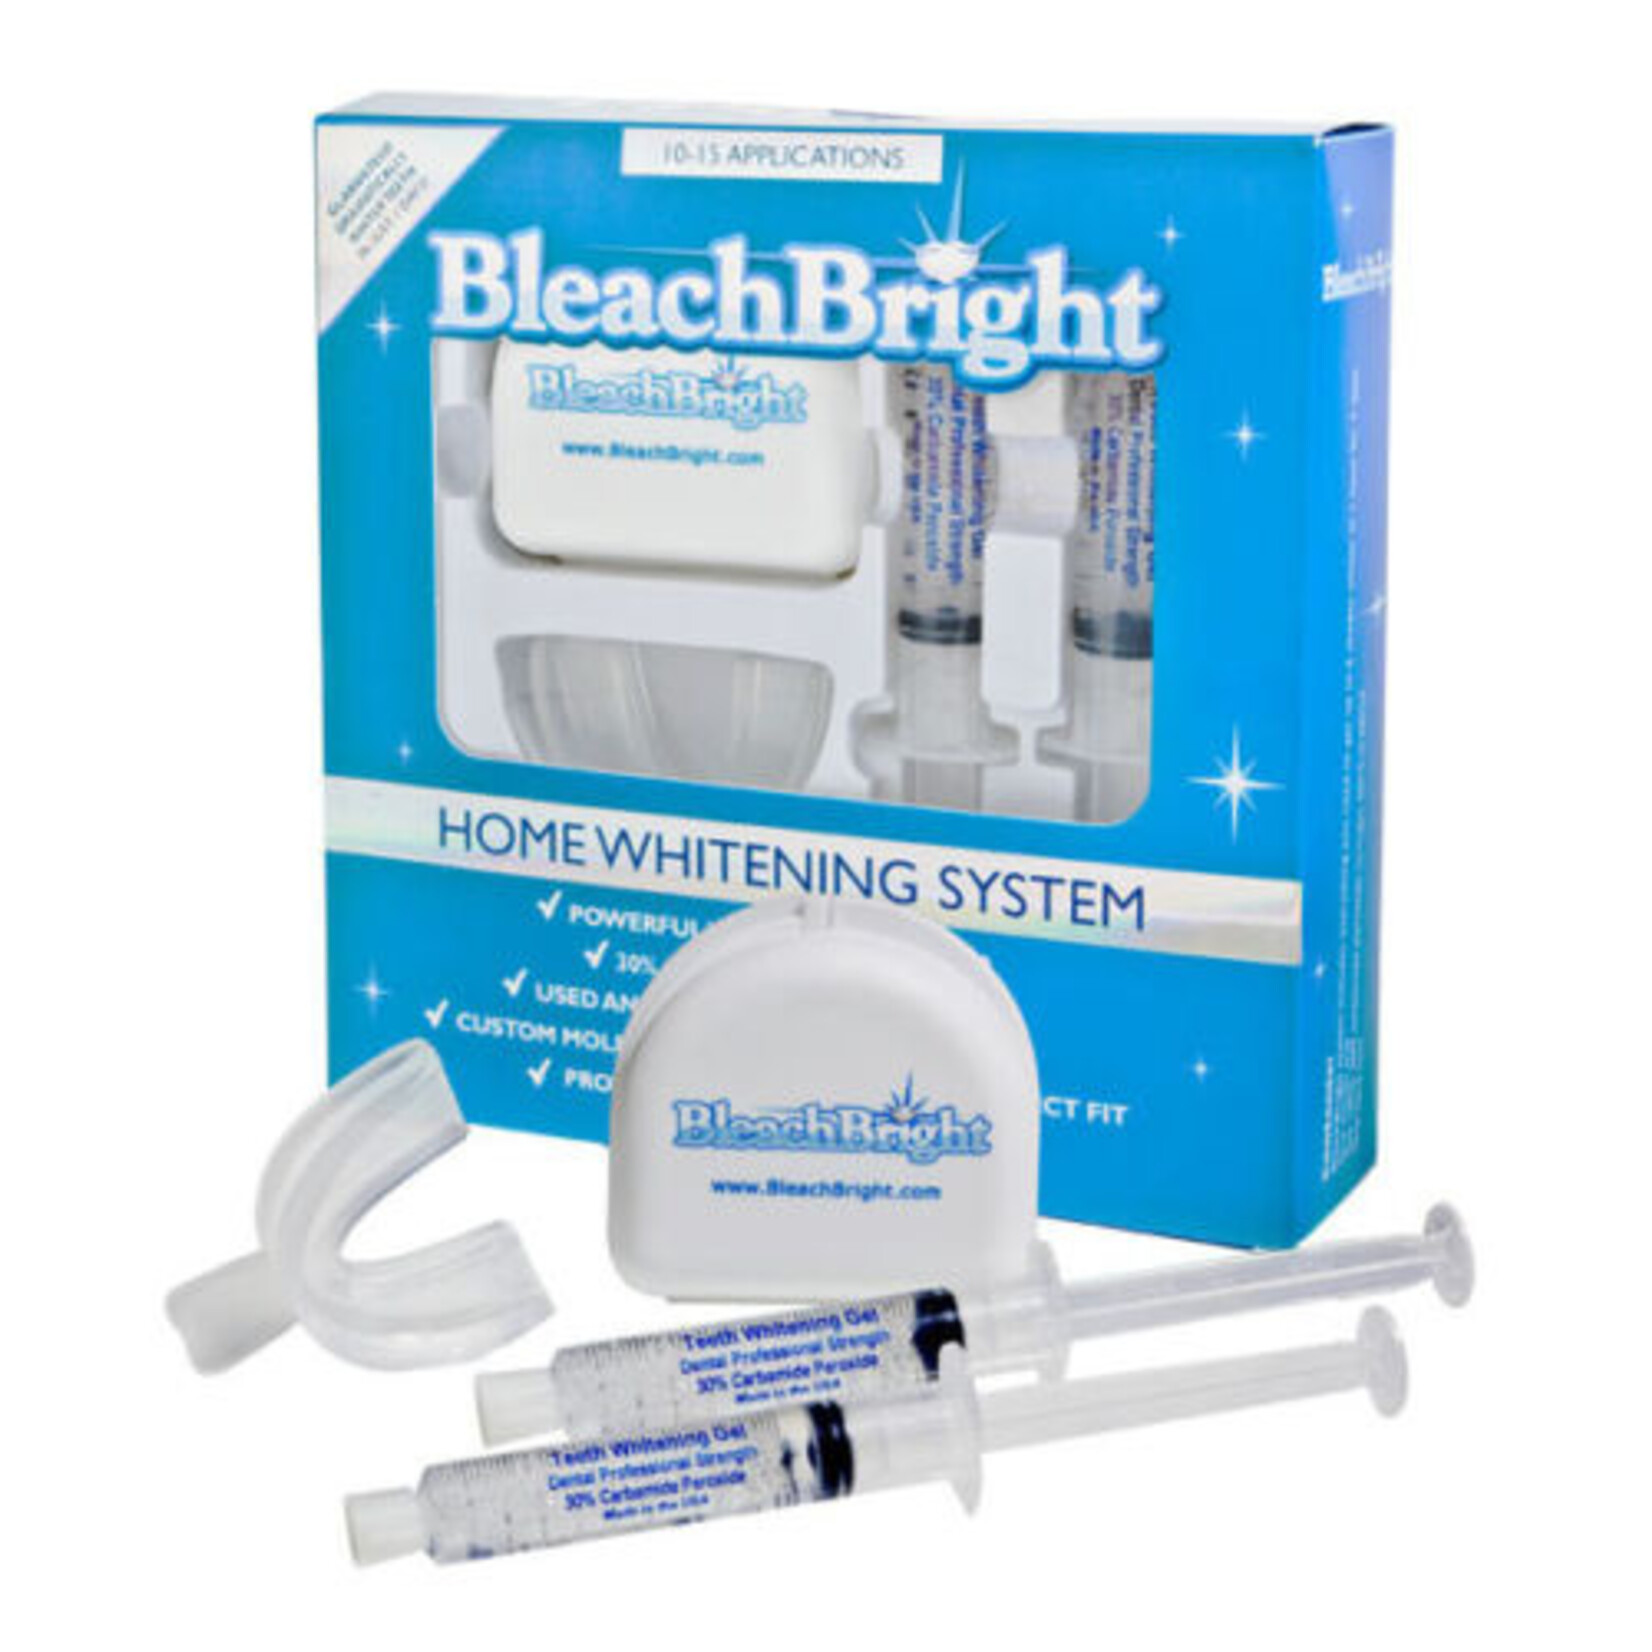 BleachBright BleachBright - The Best Home Teeth Whitening System! 10-15 Applications in Kit